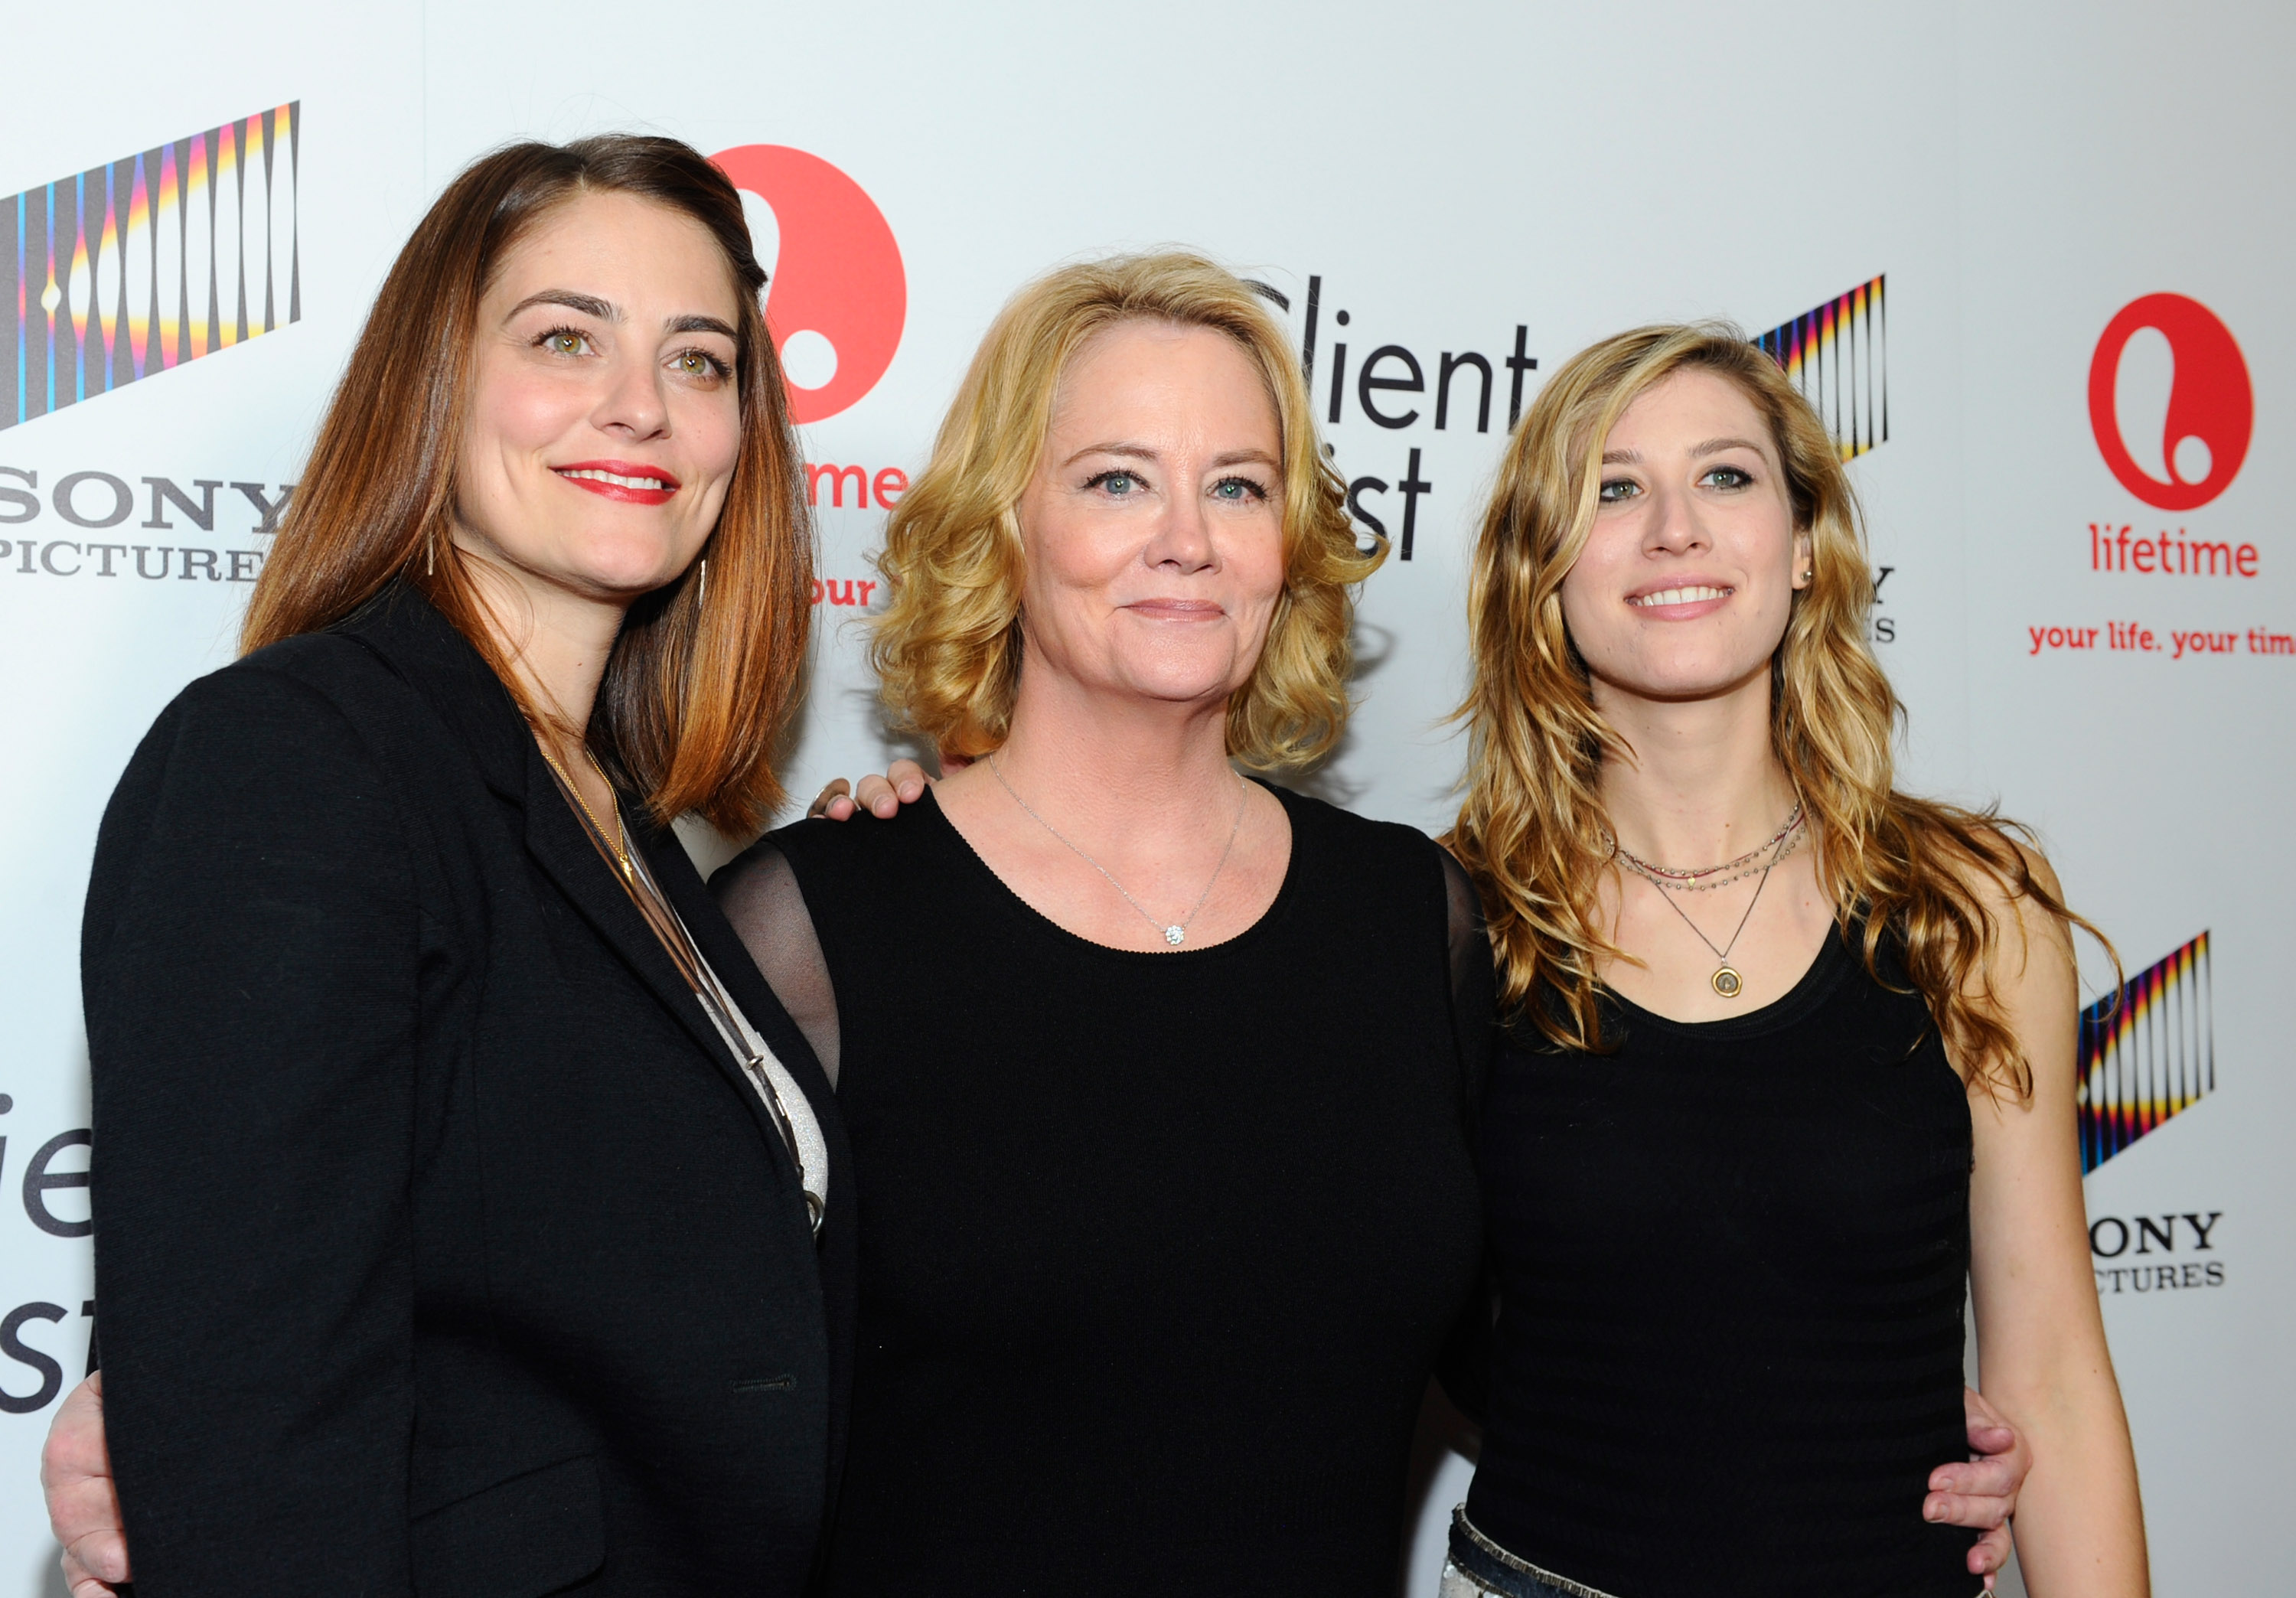 Clementine Ford, Cybill Shepherd, and Ariel Ariel Shepherd-Oppenheim attend the red carpet launch party for Lifetime and Sony Pictures' "The Client List" at Sunset Tower on April 4, 2012, in West Hollywood, California. | Source: Getty Images